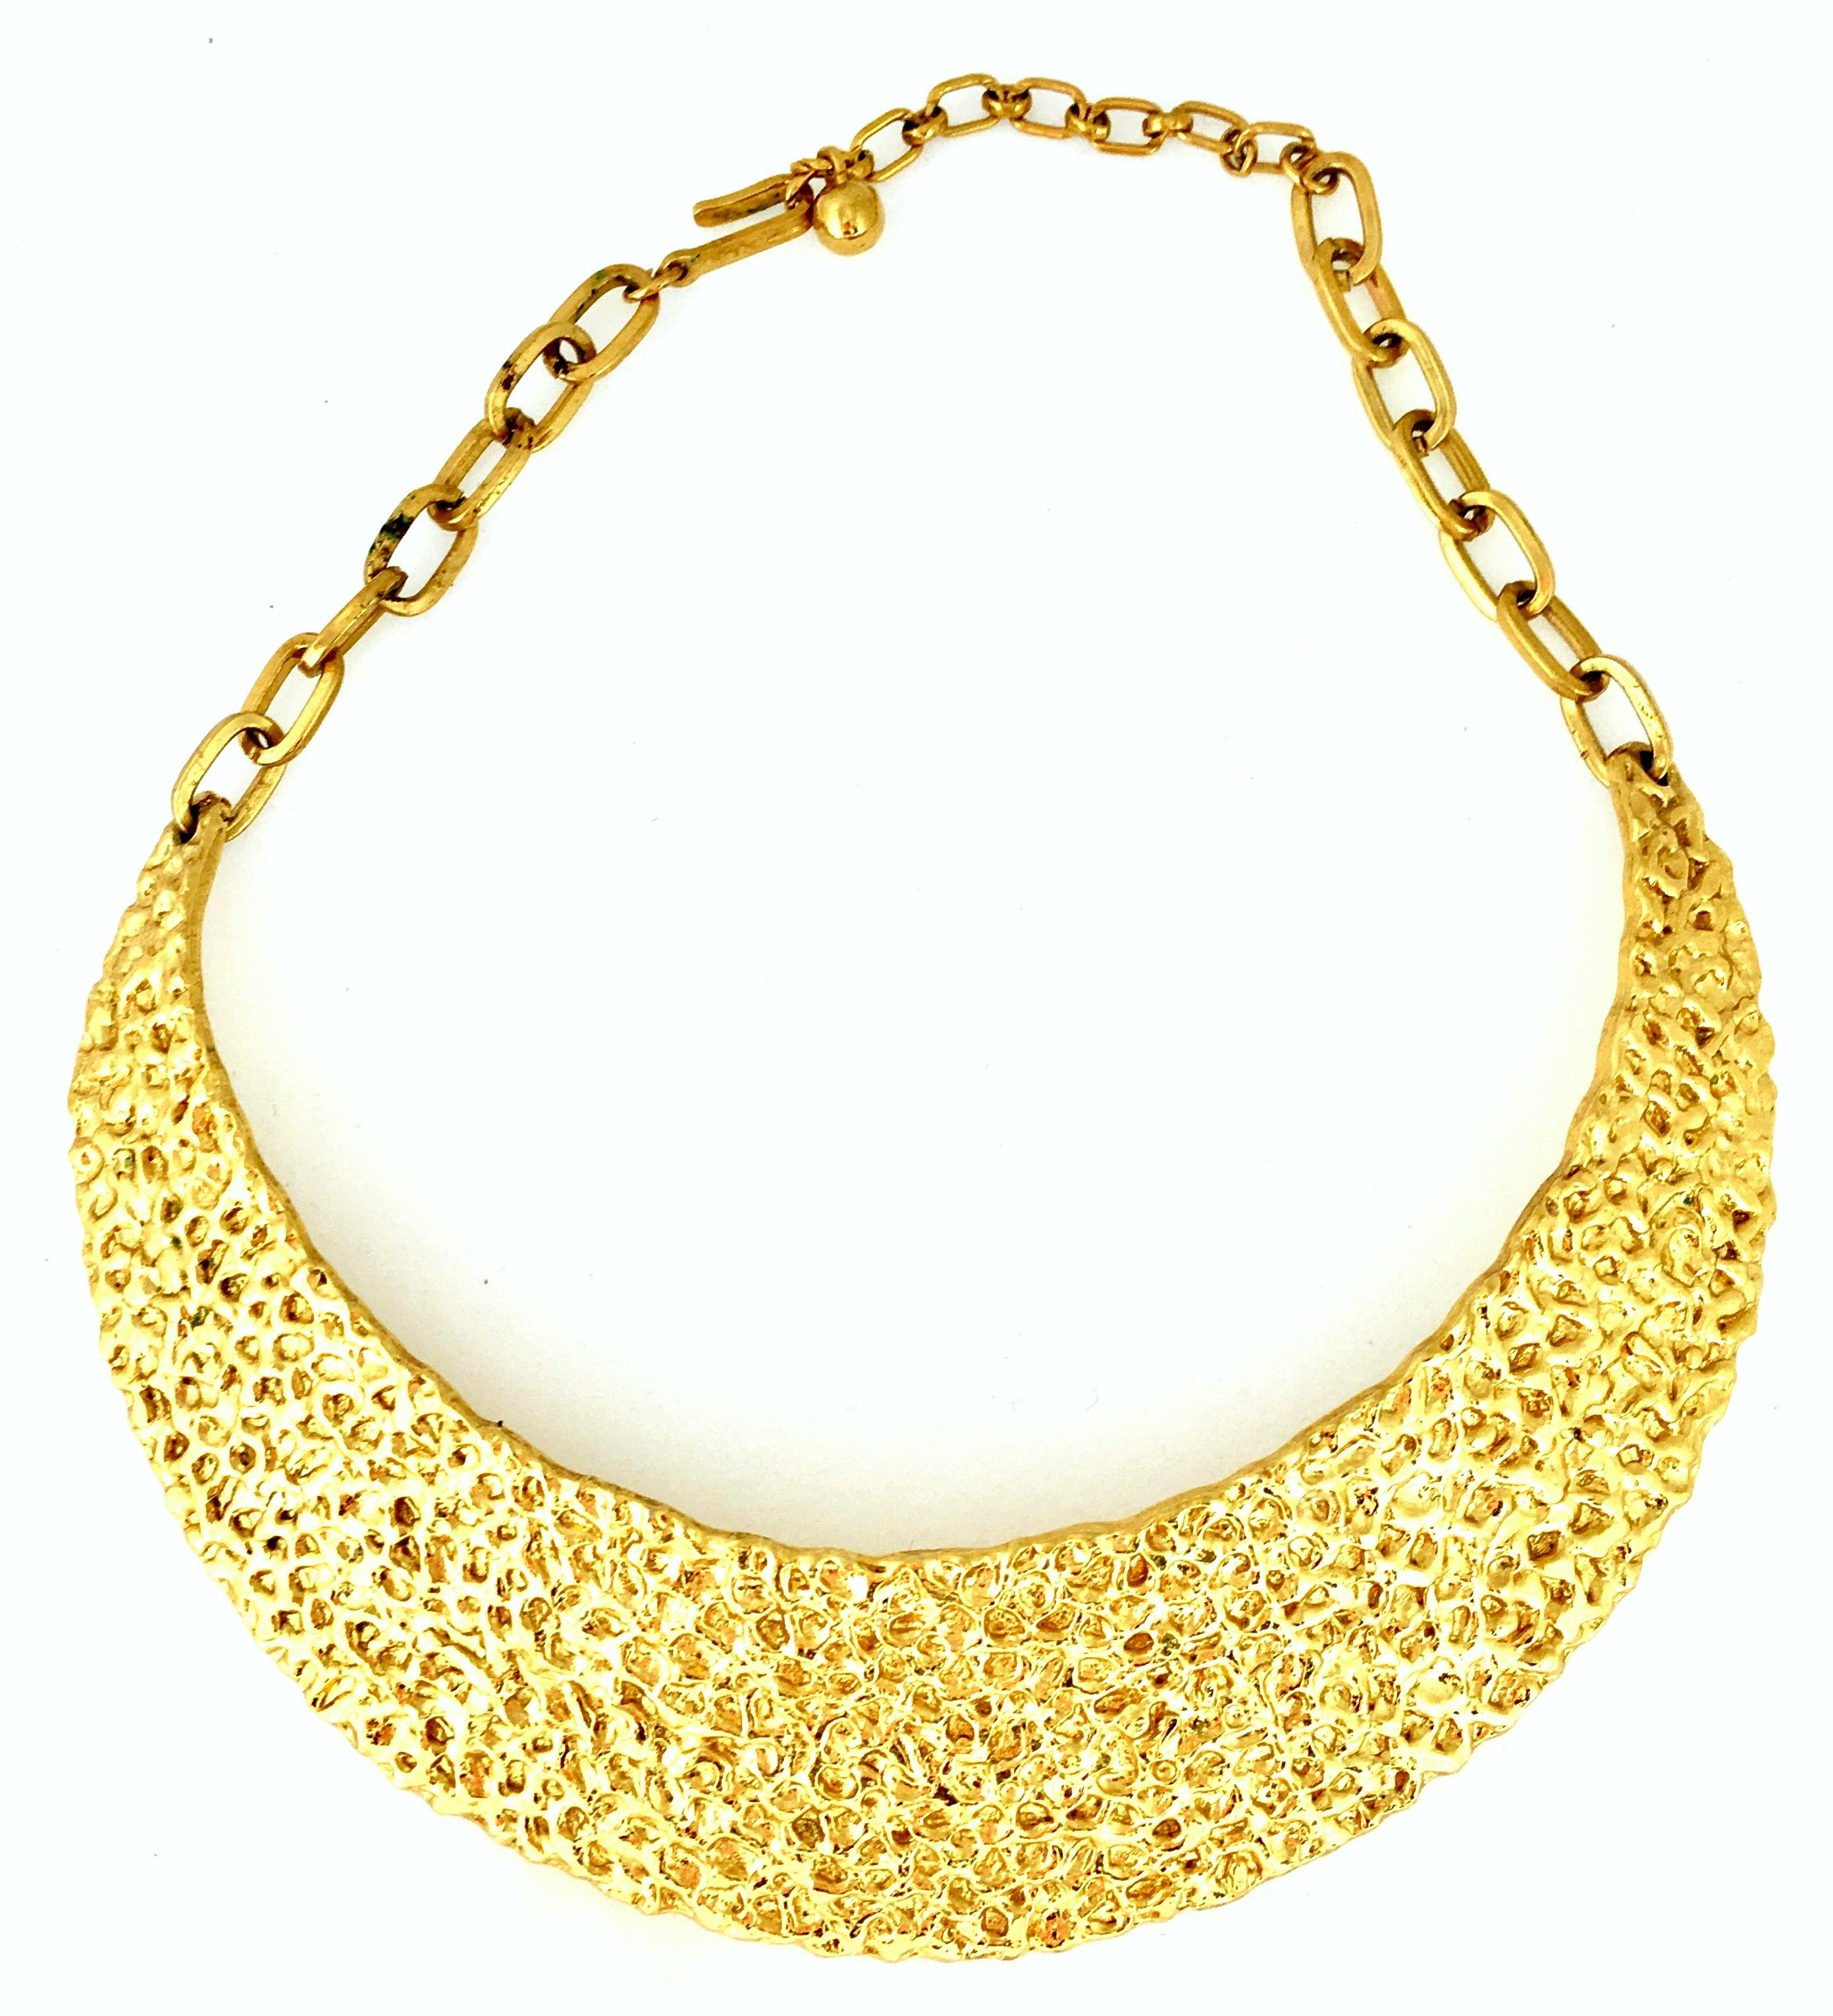 20th Century Rare Modernist Gold Plate Hammered Collar Choker Style Necklace By, Trifari. Features a gold hammered curved collar plate with a chain link adjustable clasp. Signed on the hook clasp, Trifari.
Hammered collar plate measures, 5.75